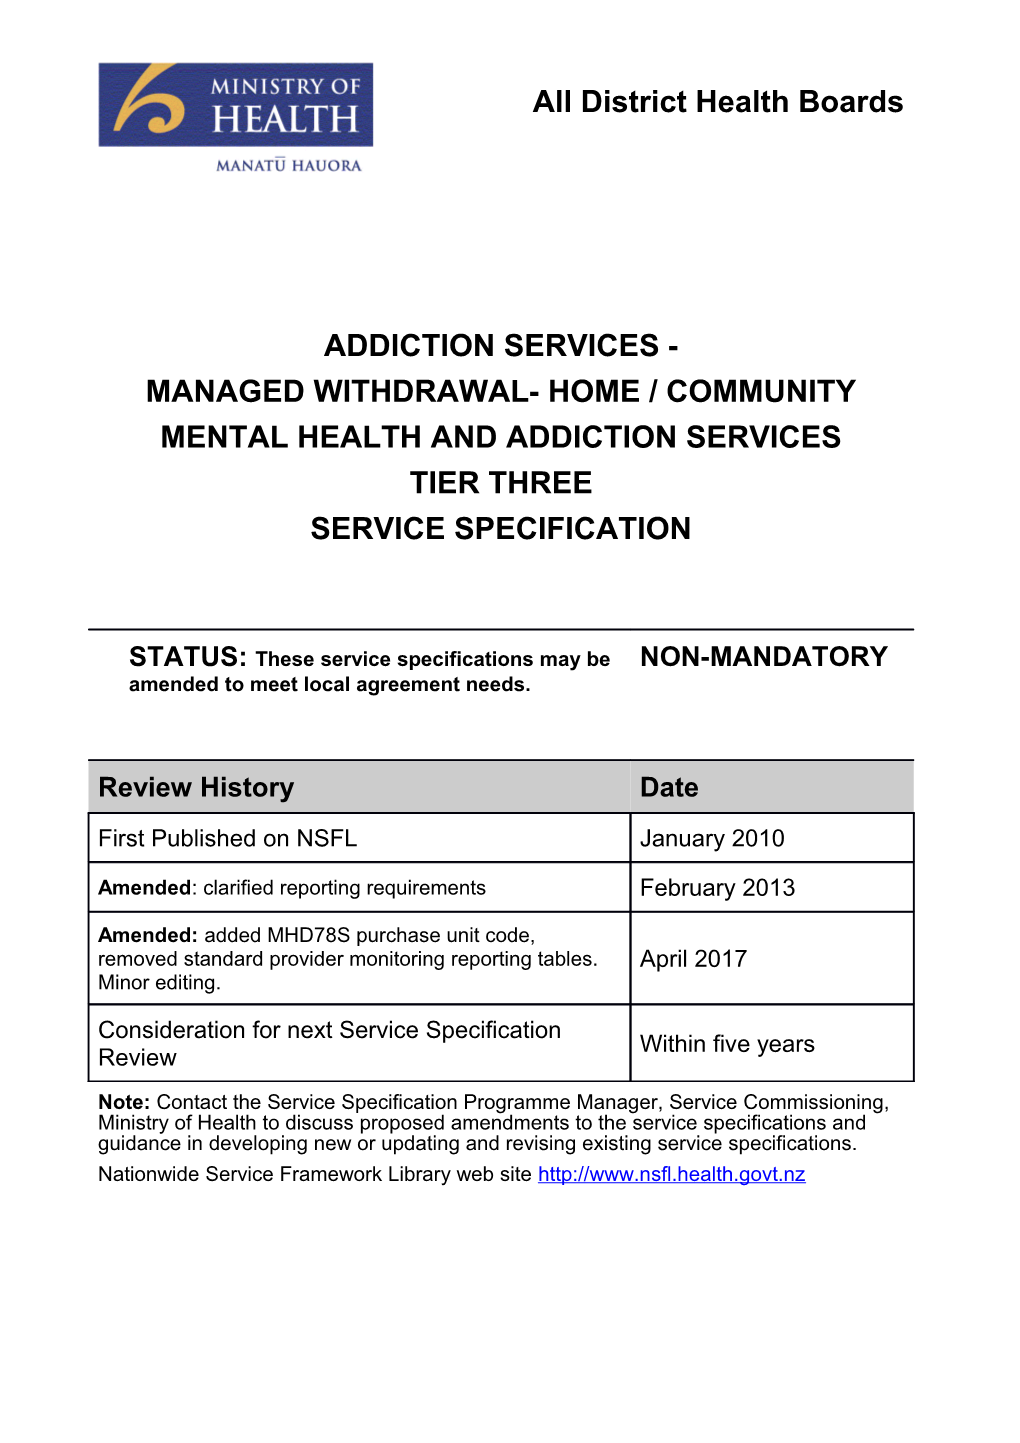 Addiction Services - Managed Withdrawal- Home/Community